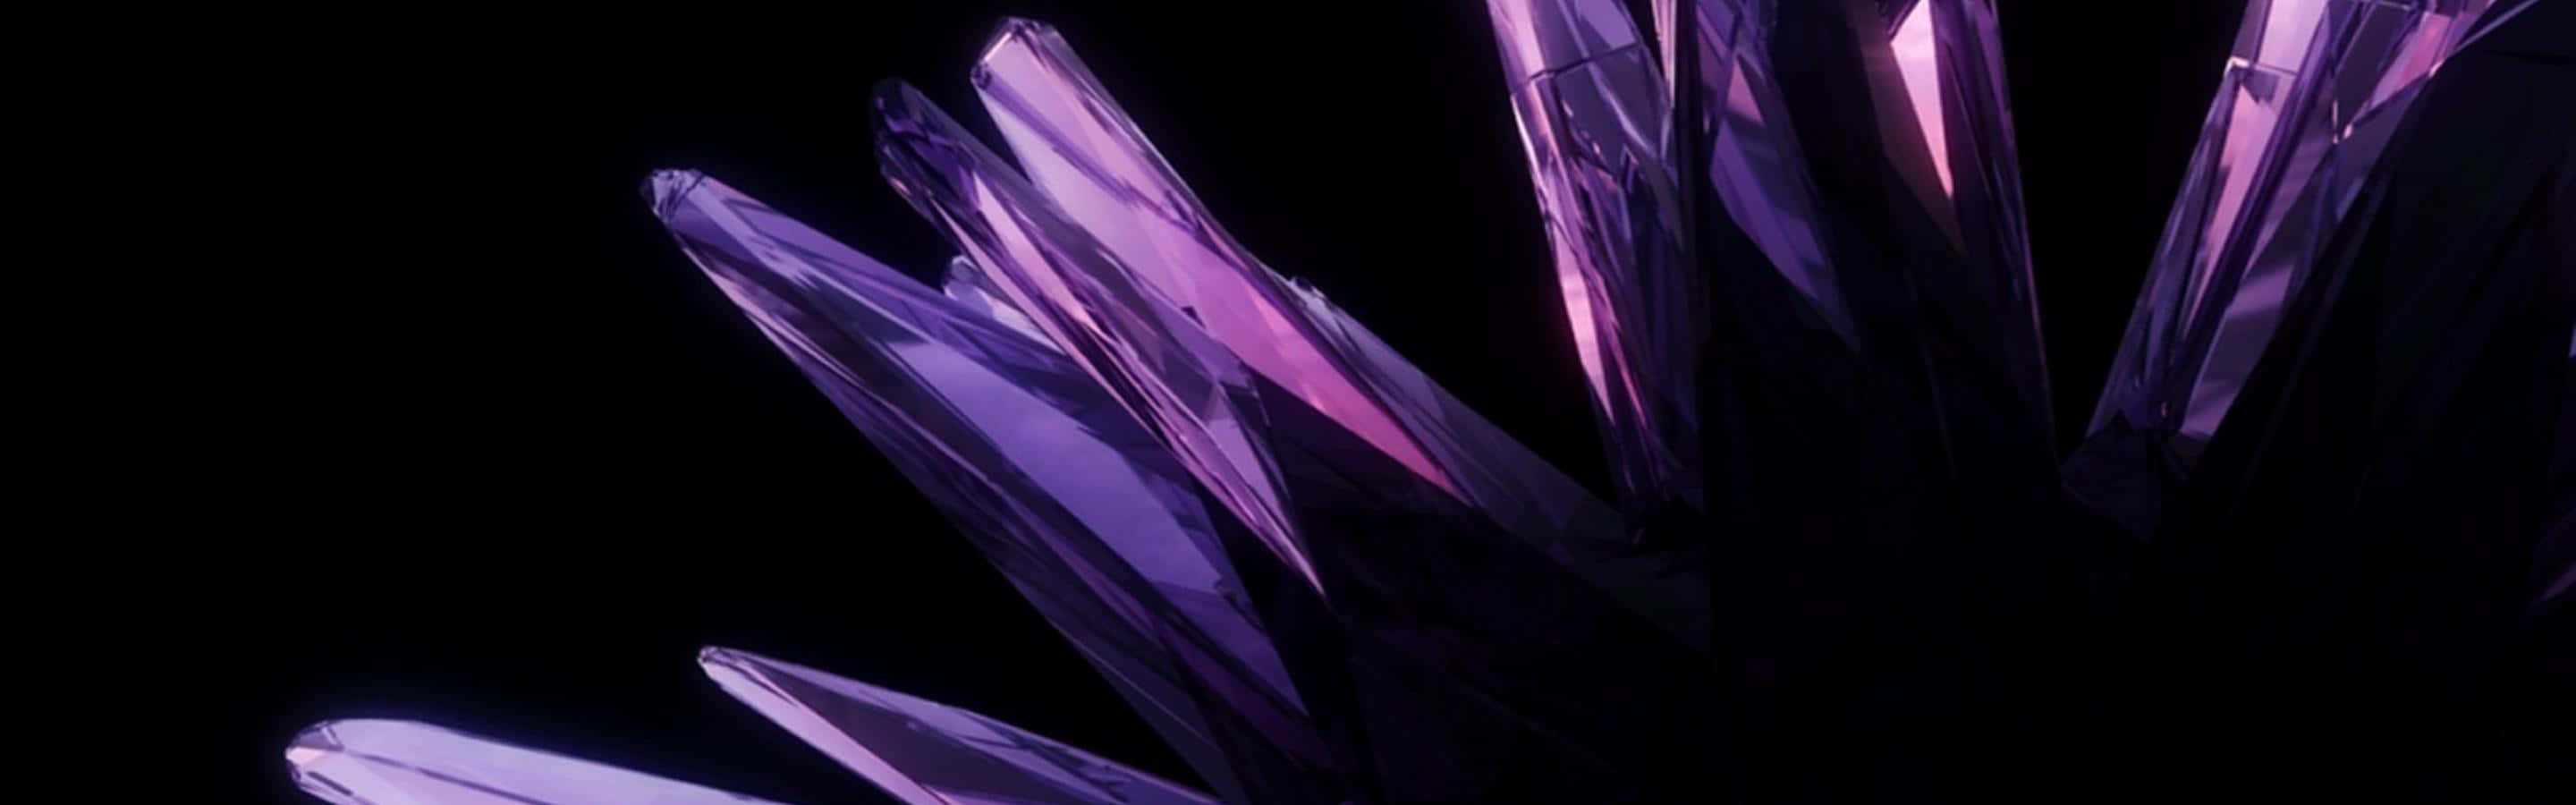 Purple Crystals On A Black Background Wallpaper